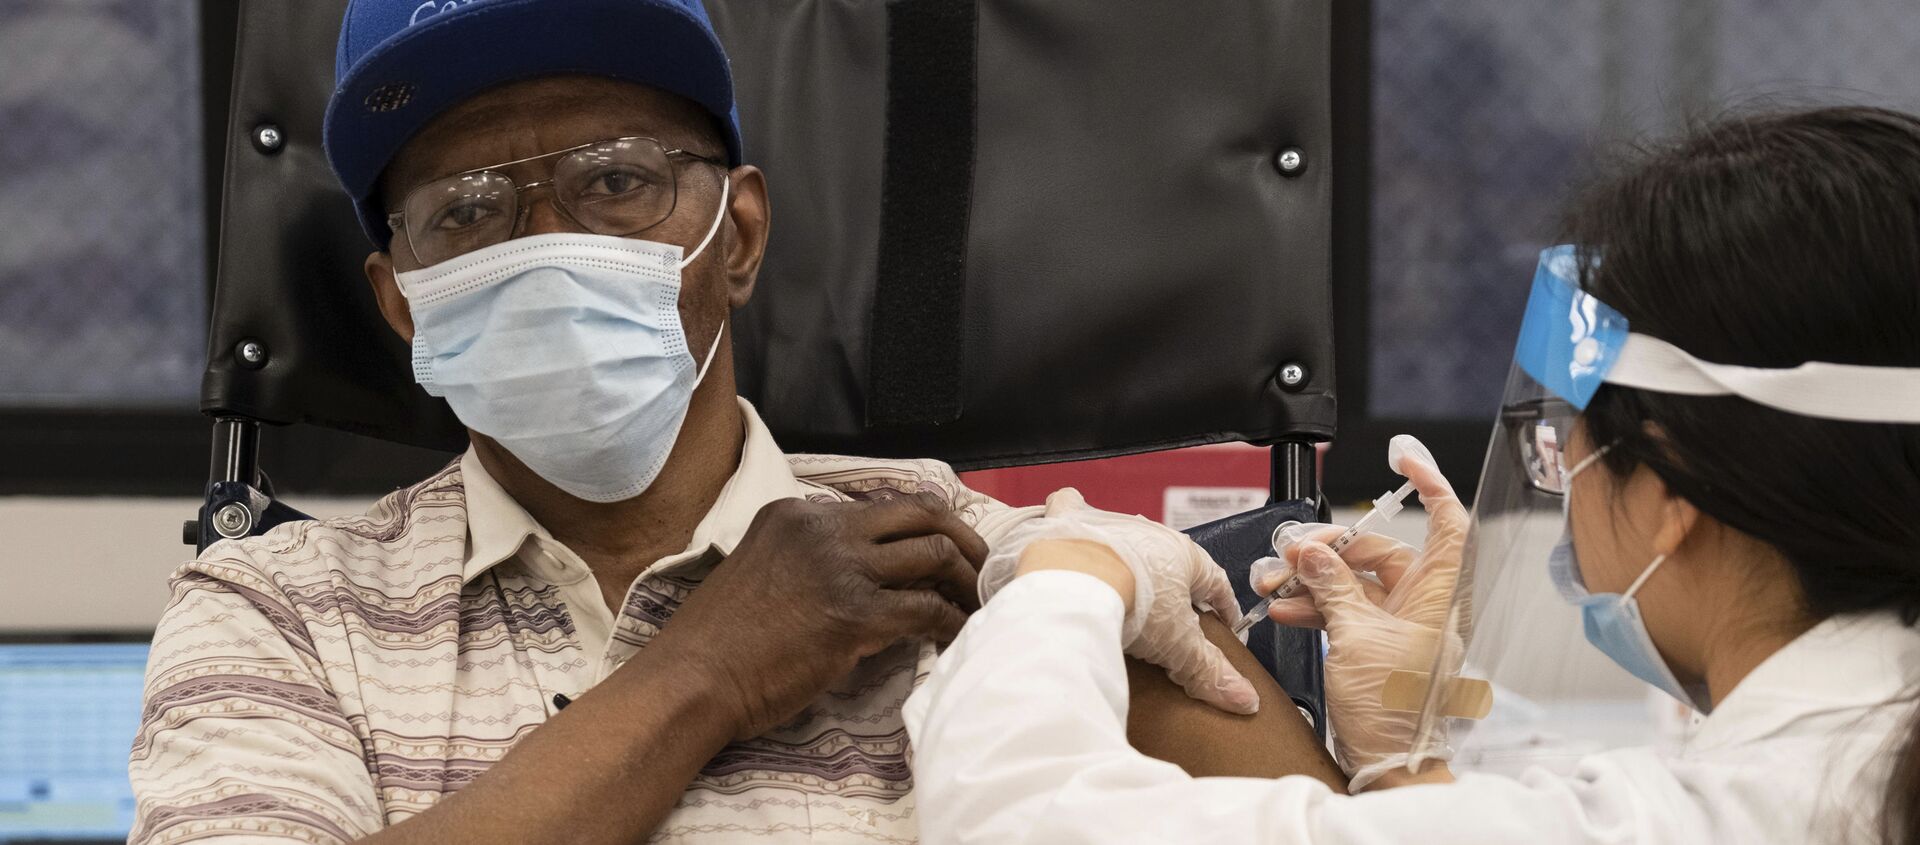  In this Jan. 15, 2021, file photo, a nursing home resident receives the COVID-19 vaccine by a CVS Pharmacist at Harlem Center for Nursing and Rehabilitation, a nursing home facility in Harlem neighborhood of New York.  - 俄羅斯衛星通訊社, 1920, 14.02.2021